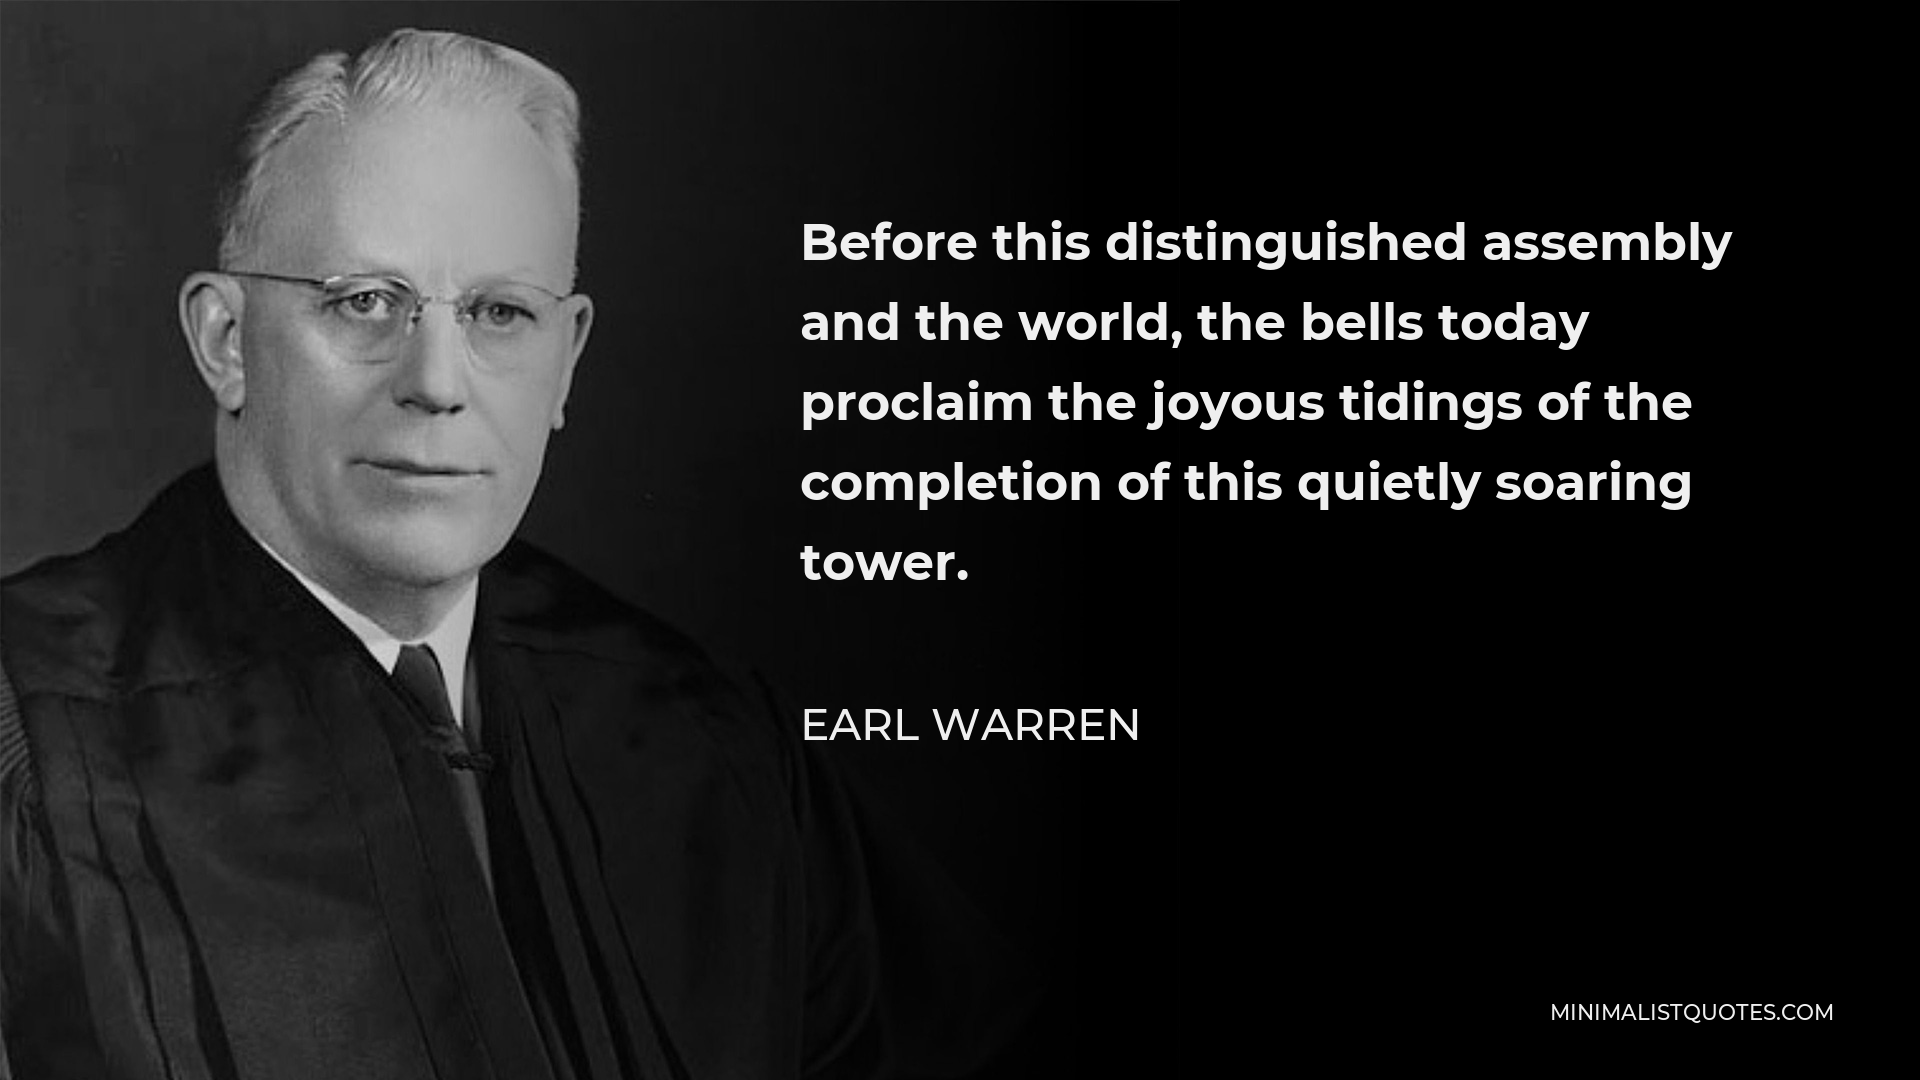 Earl Warren Quote - Before this distinguished assembly and the world, the bells today proclaim the joyous tidings of the completion of this quietly soaring tower.